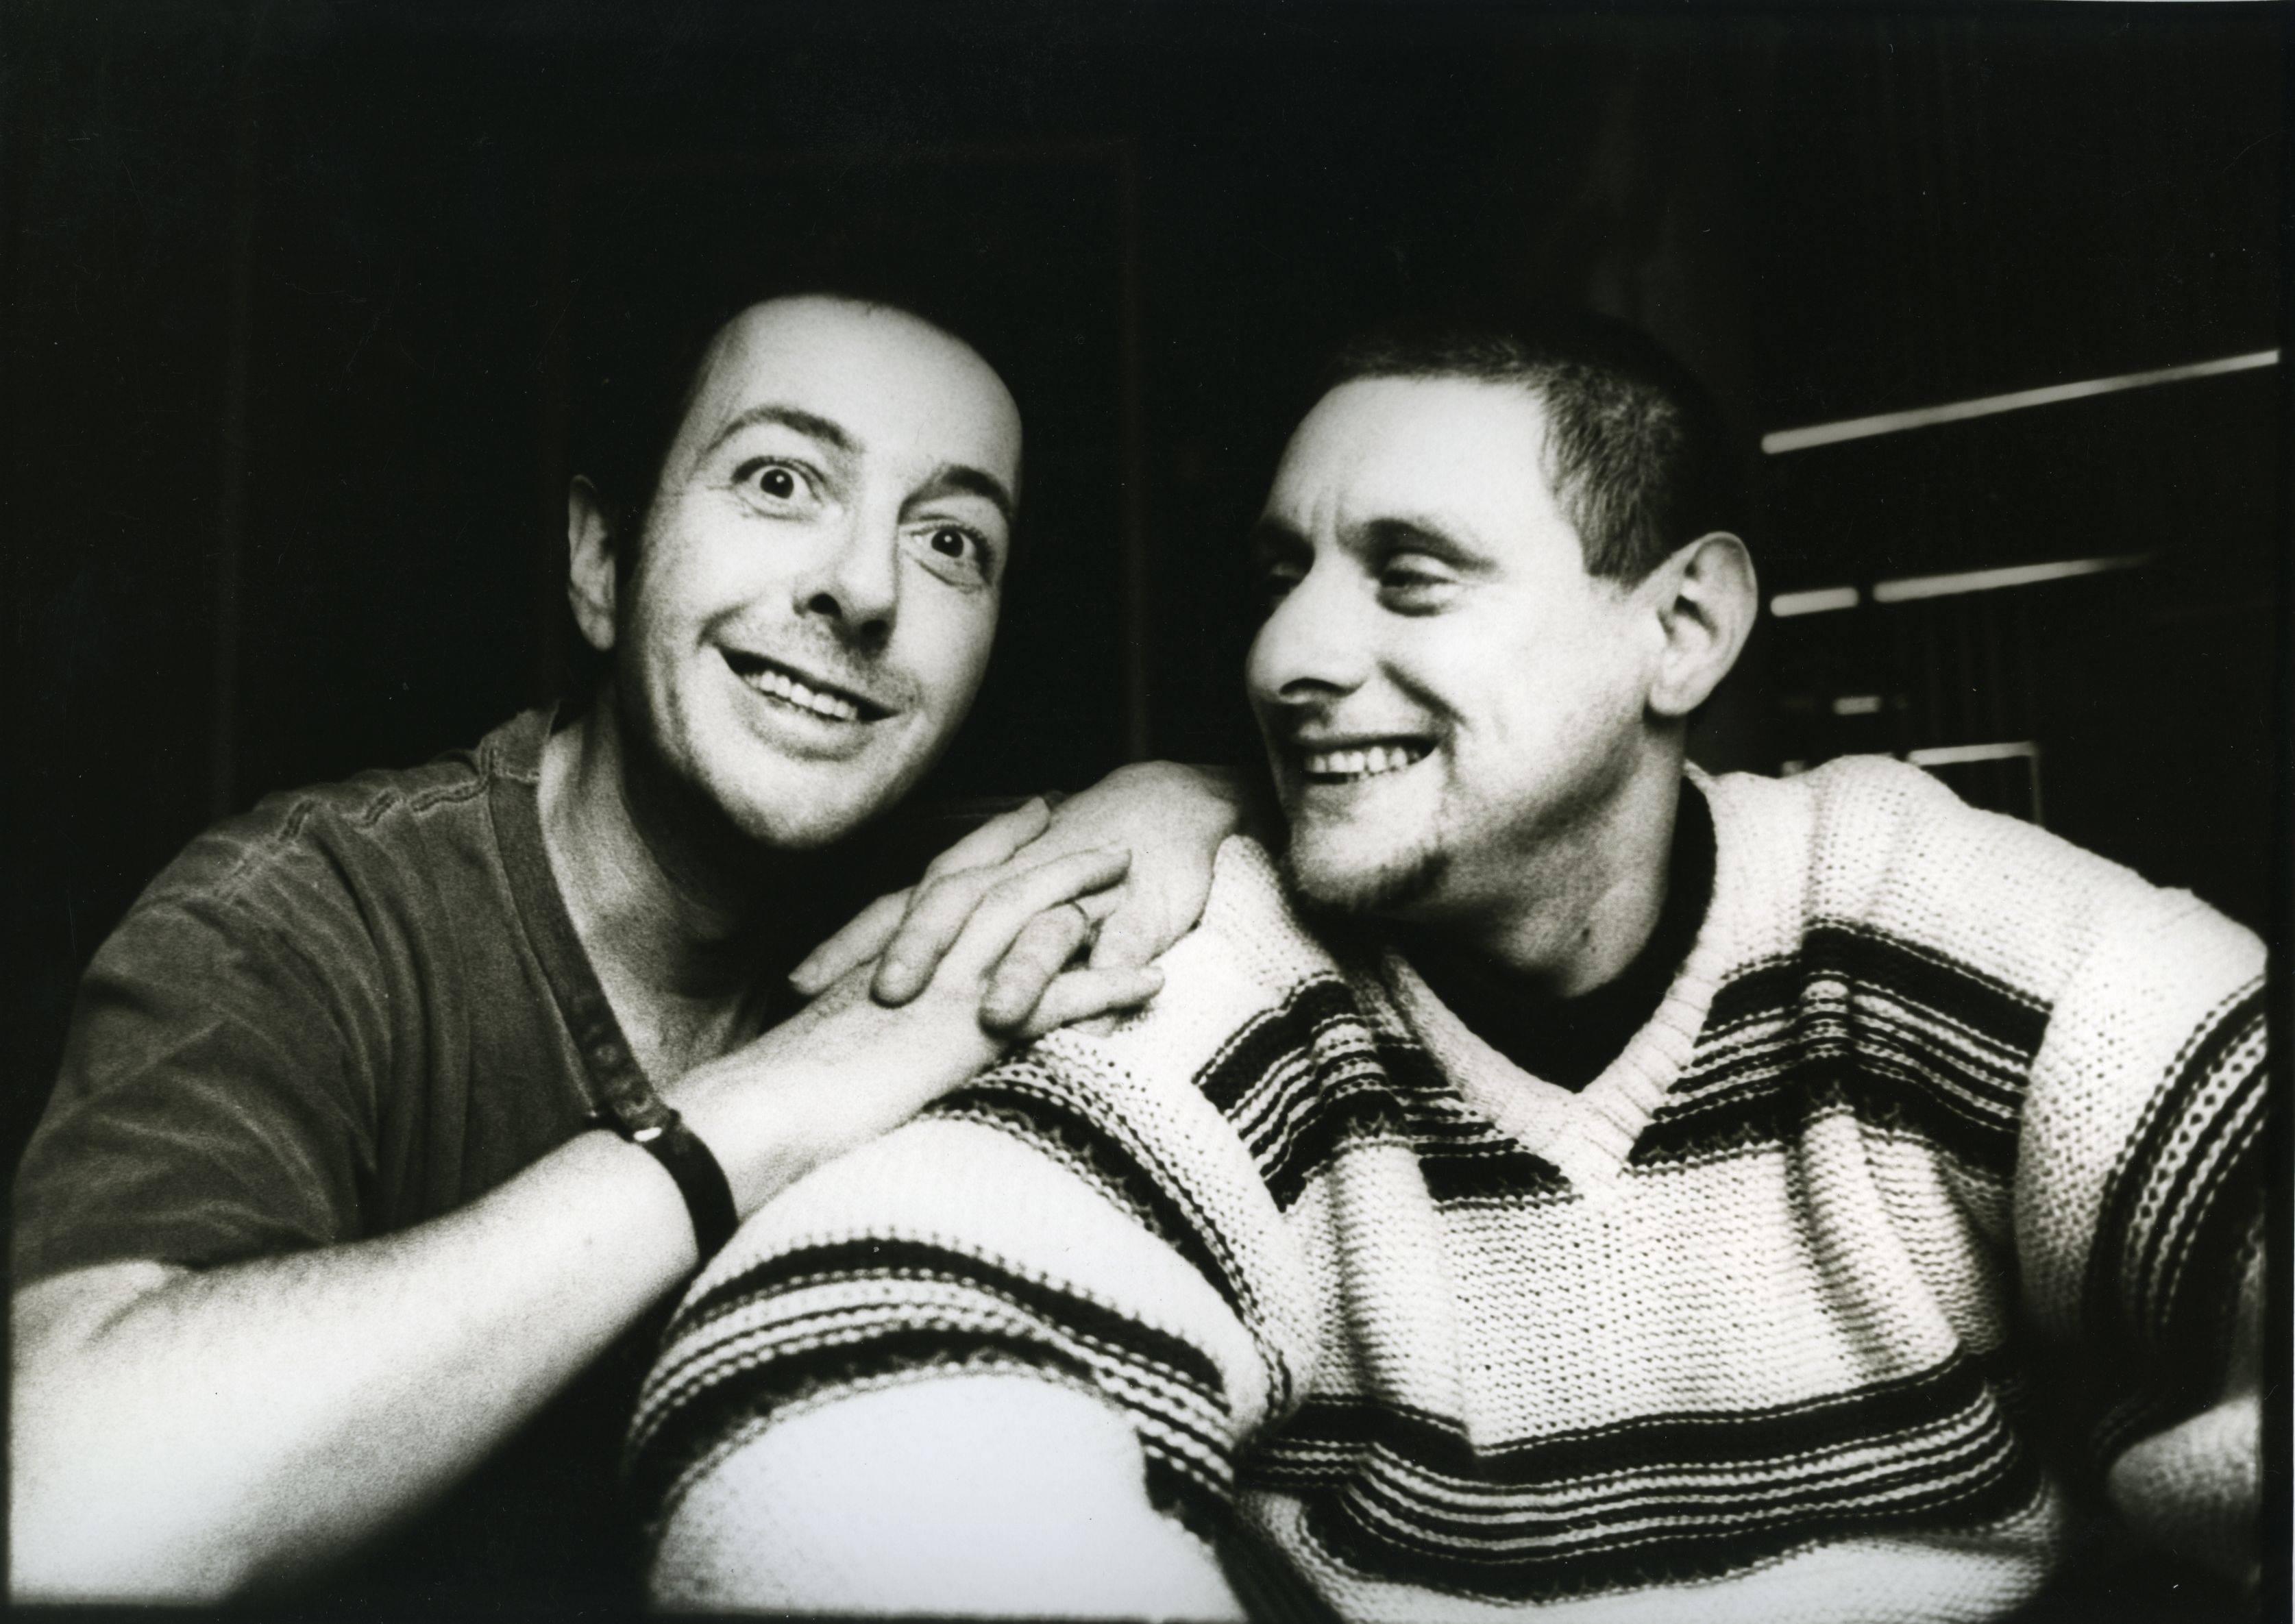 Martyn Goodacre Black and White Photograph - Joe Strummer and Sean Ryder of The Clash Vintage Original Photograph